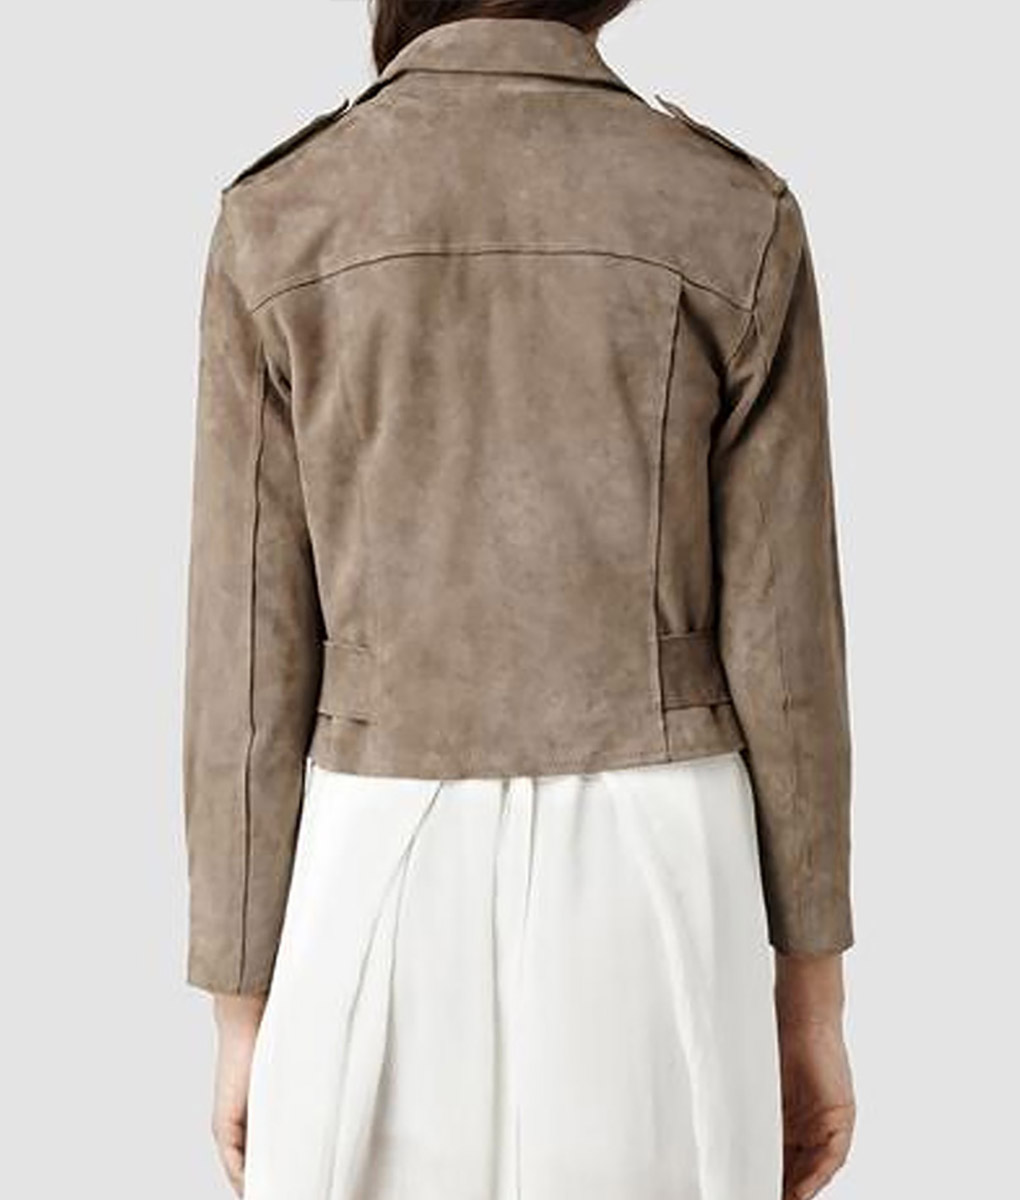 Ophelia Pryce The Royals Brown Suede Leather Jacket (3)